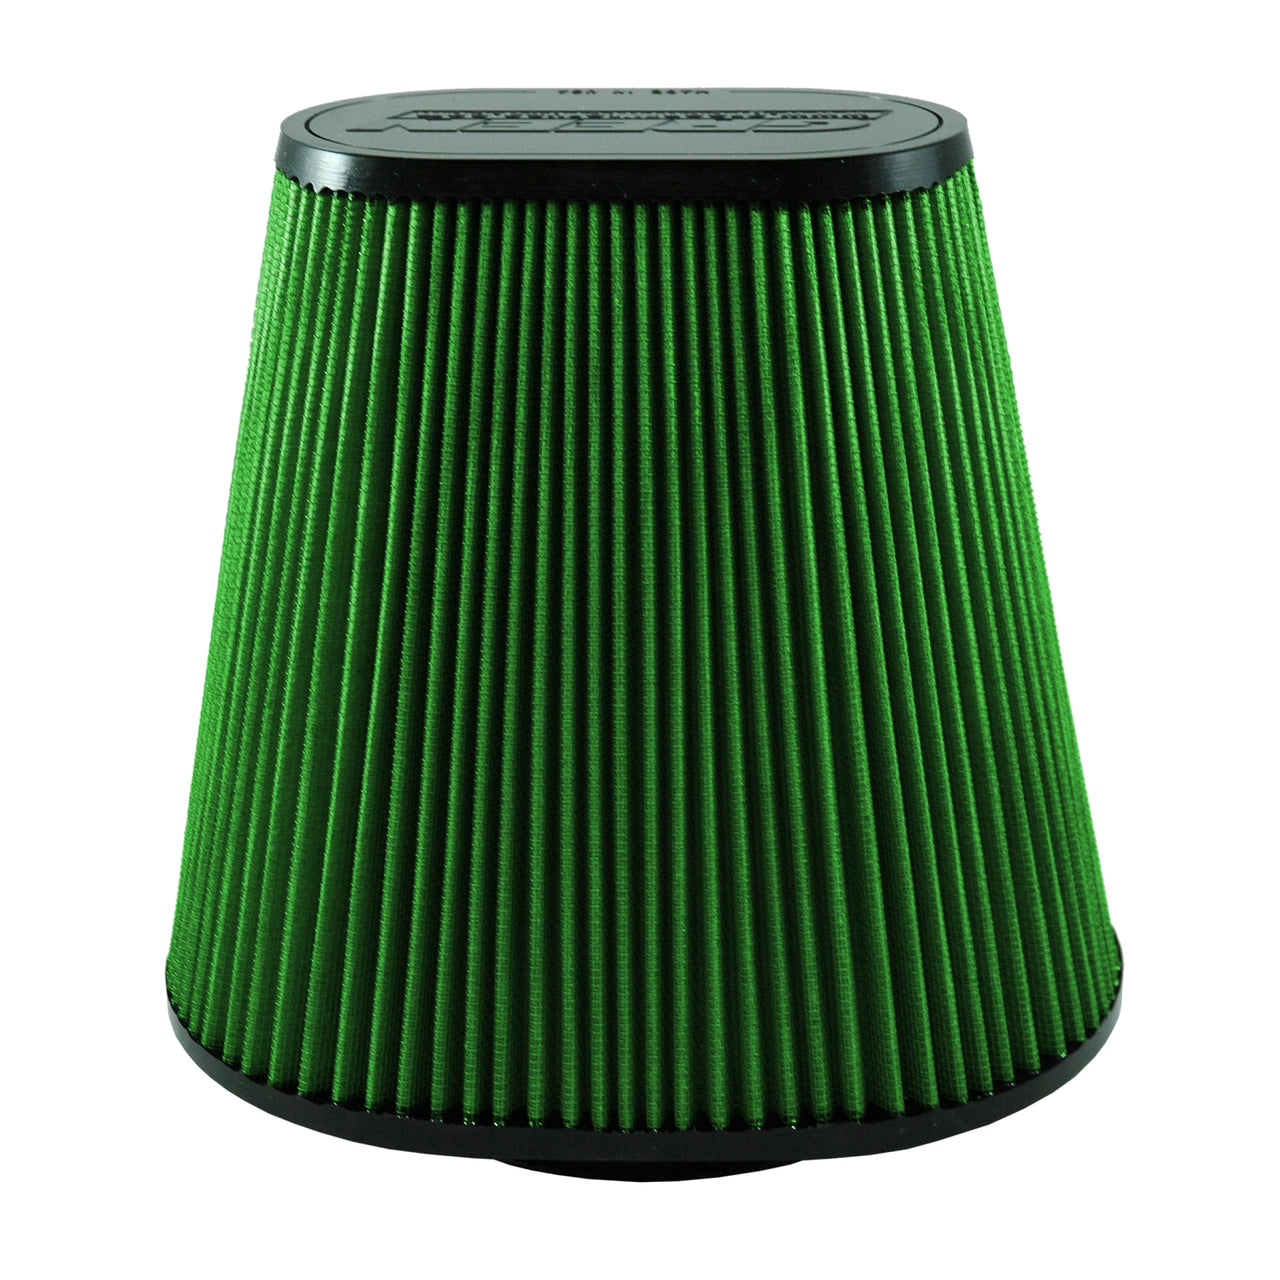 Green Filter Oval Cone Filter - ID 6in. / Base 11x8in. / Top 7.25x4.25in. / H 10in.